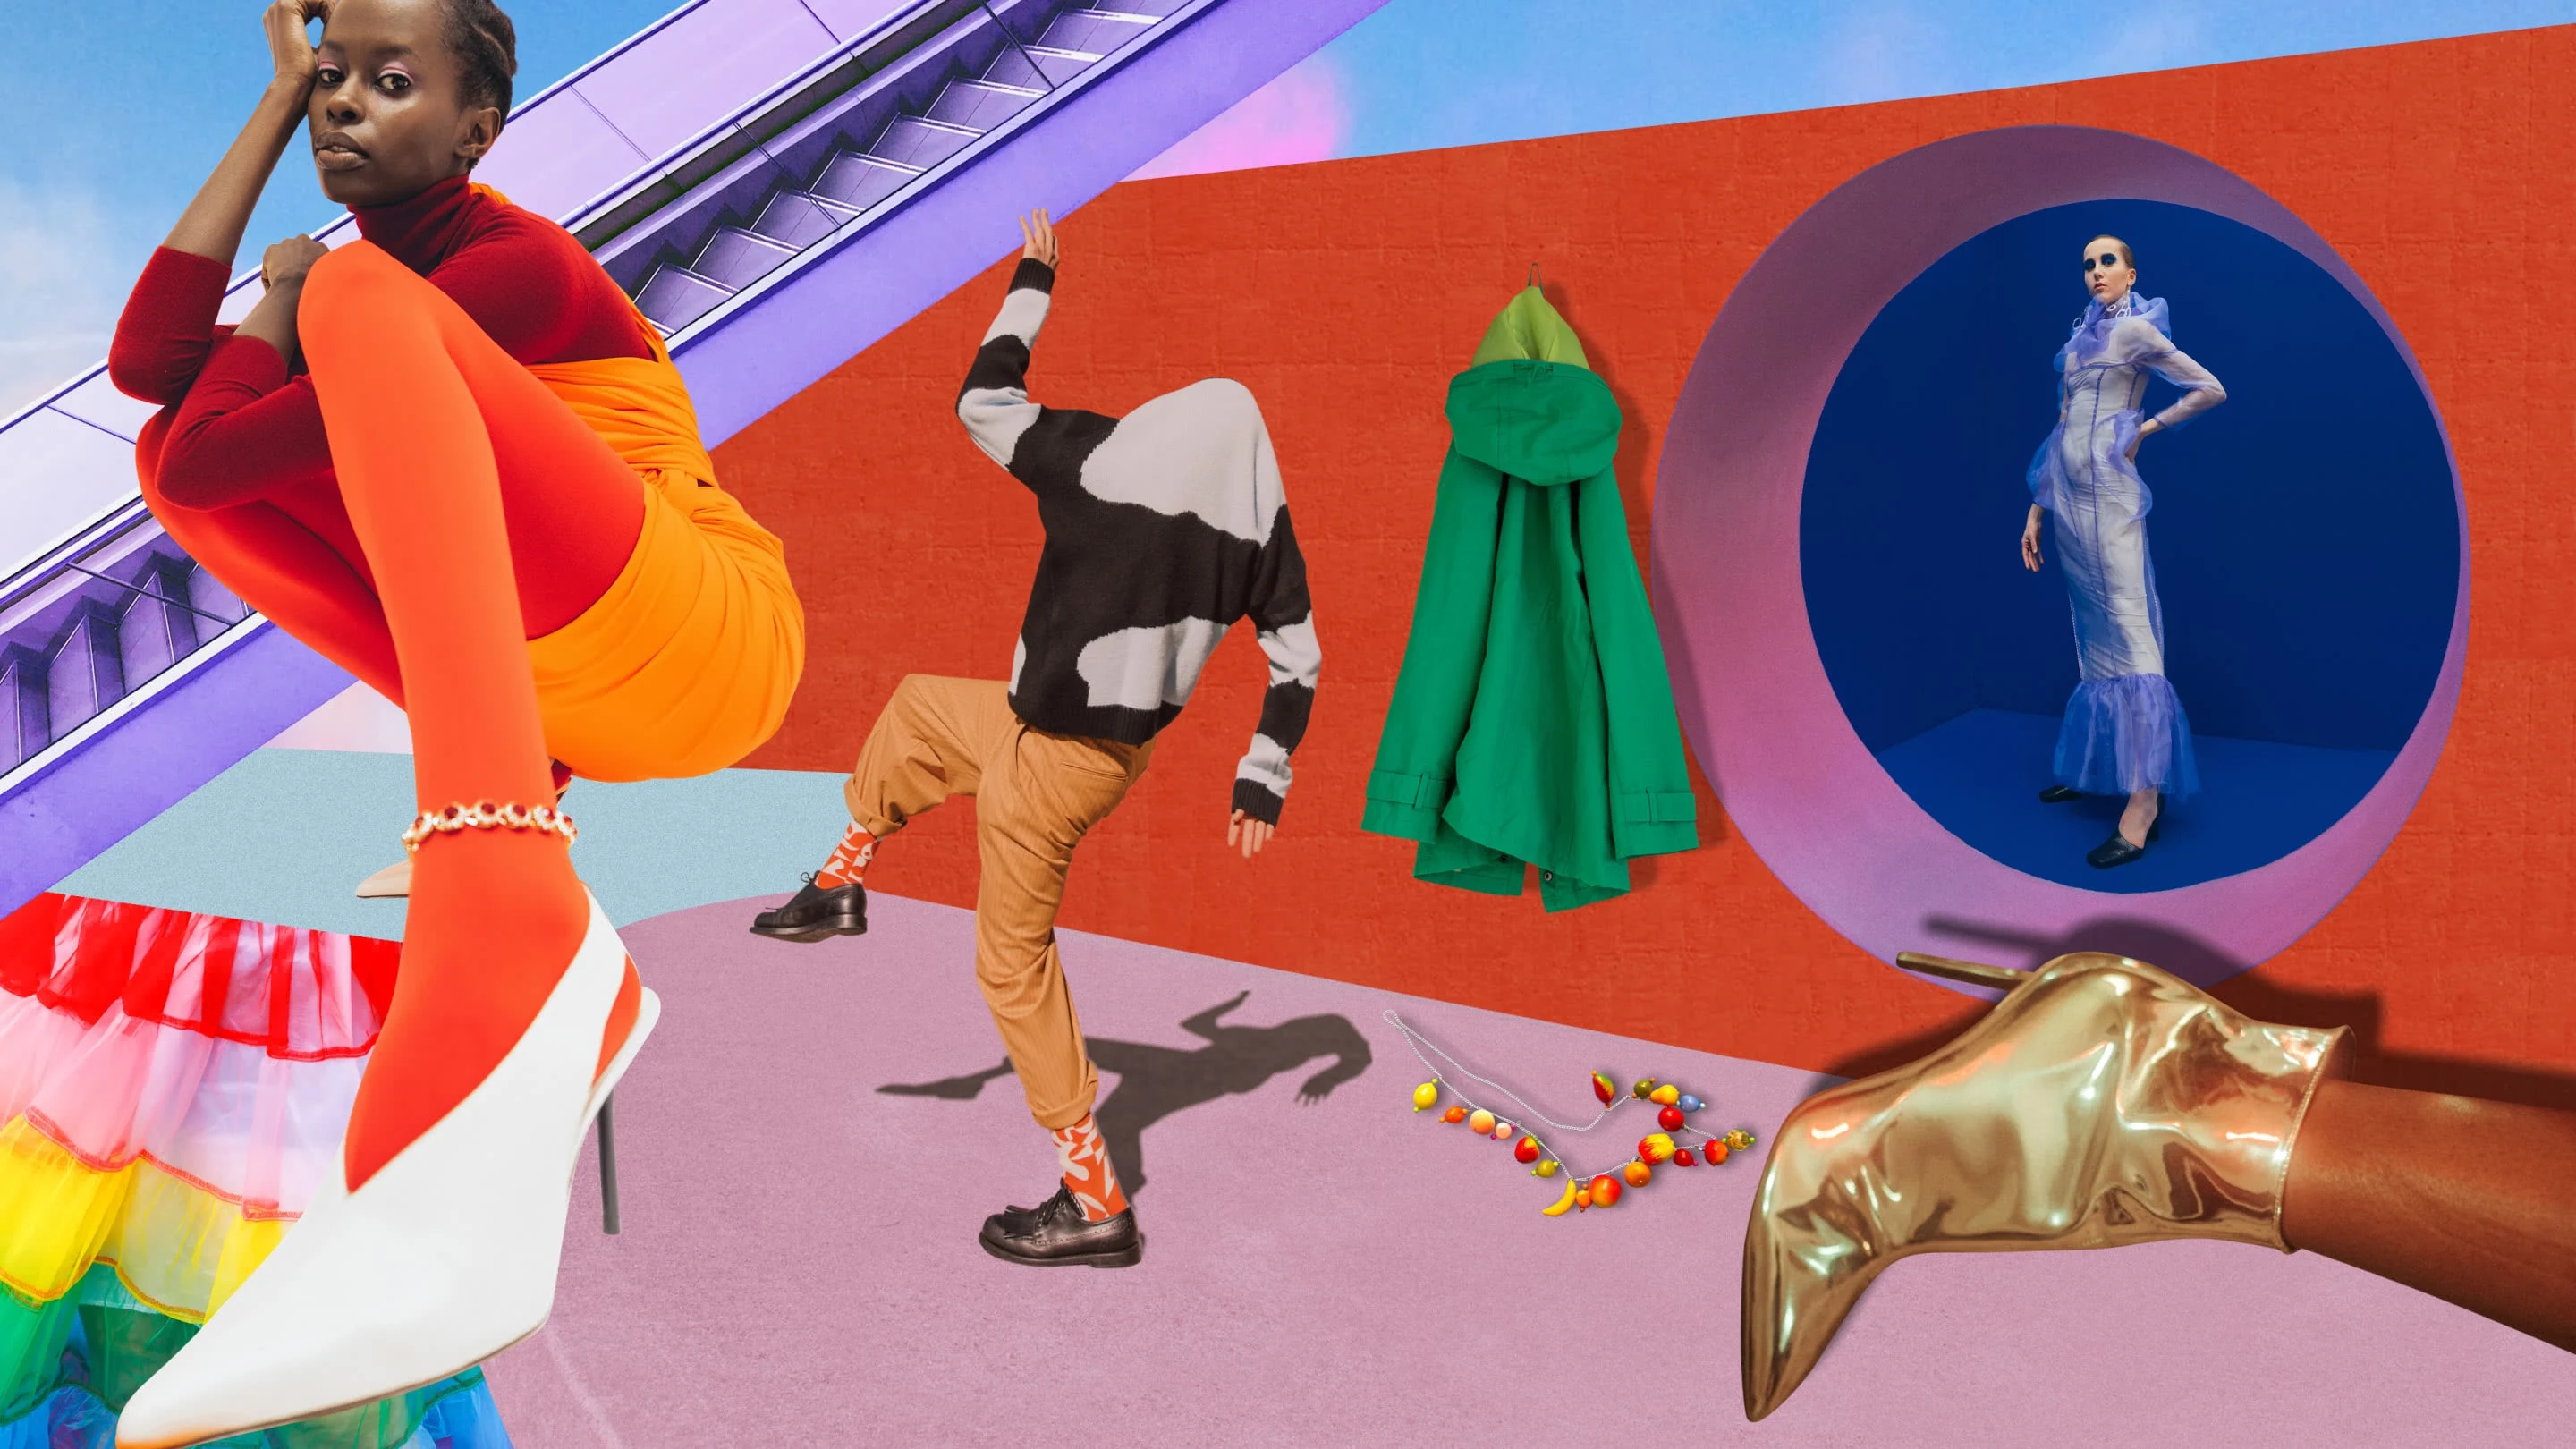 Collage of different people in colorful apparel. Black woman to the left wears a bright orange outfit. Man at center wears a printed top pulled over his head, orange pants and orange socks. White woman on the right wears a blue chiffon dress.